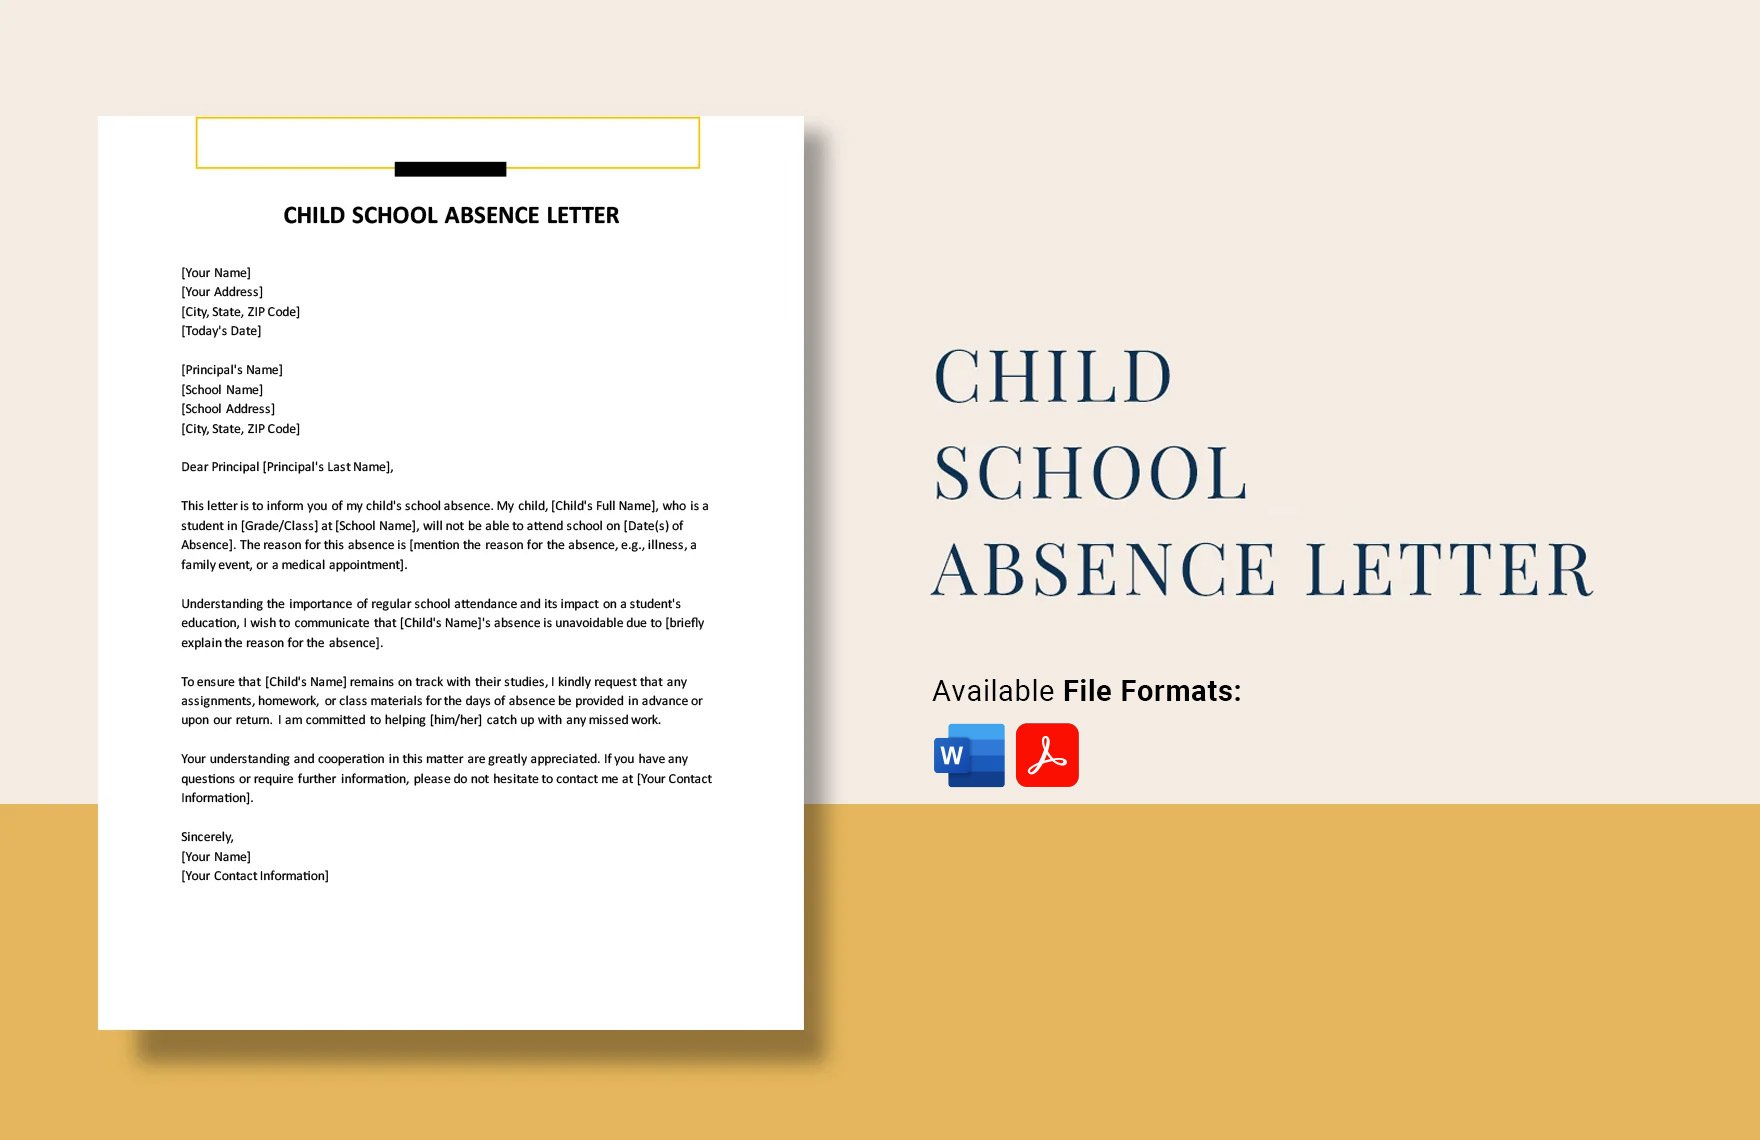 Child School Absence Letter